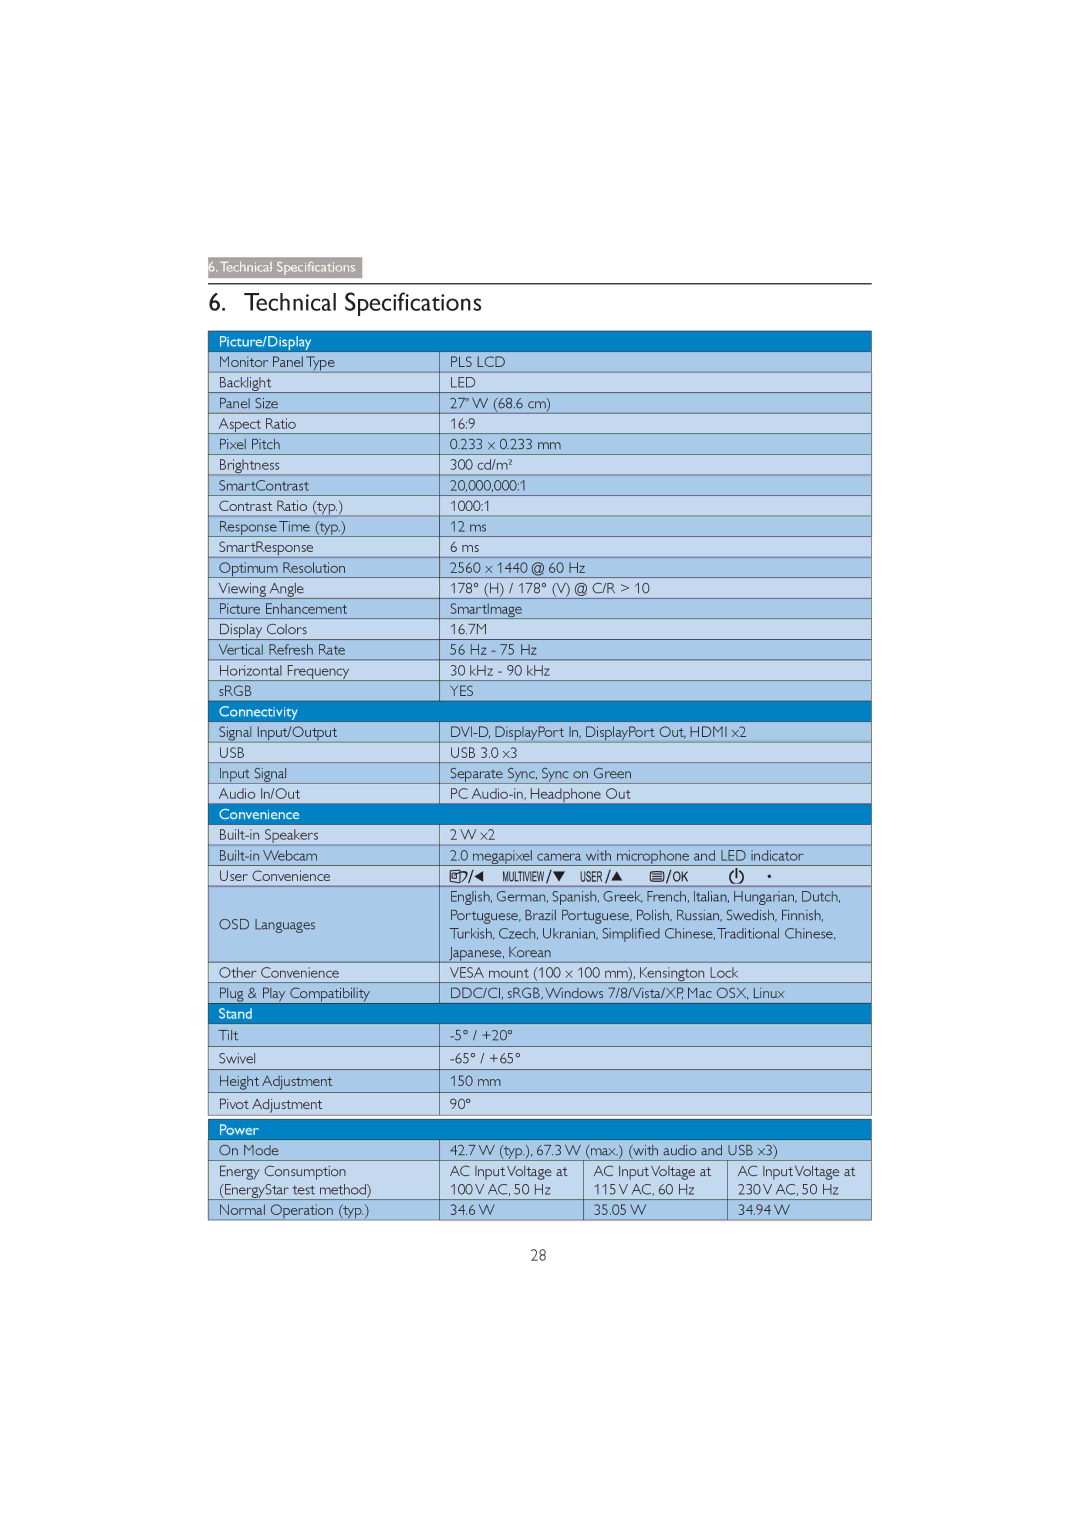 Philips 272P4 user manual Technical Specifications, Led 